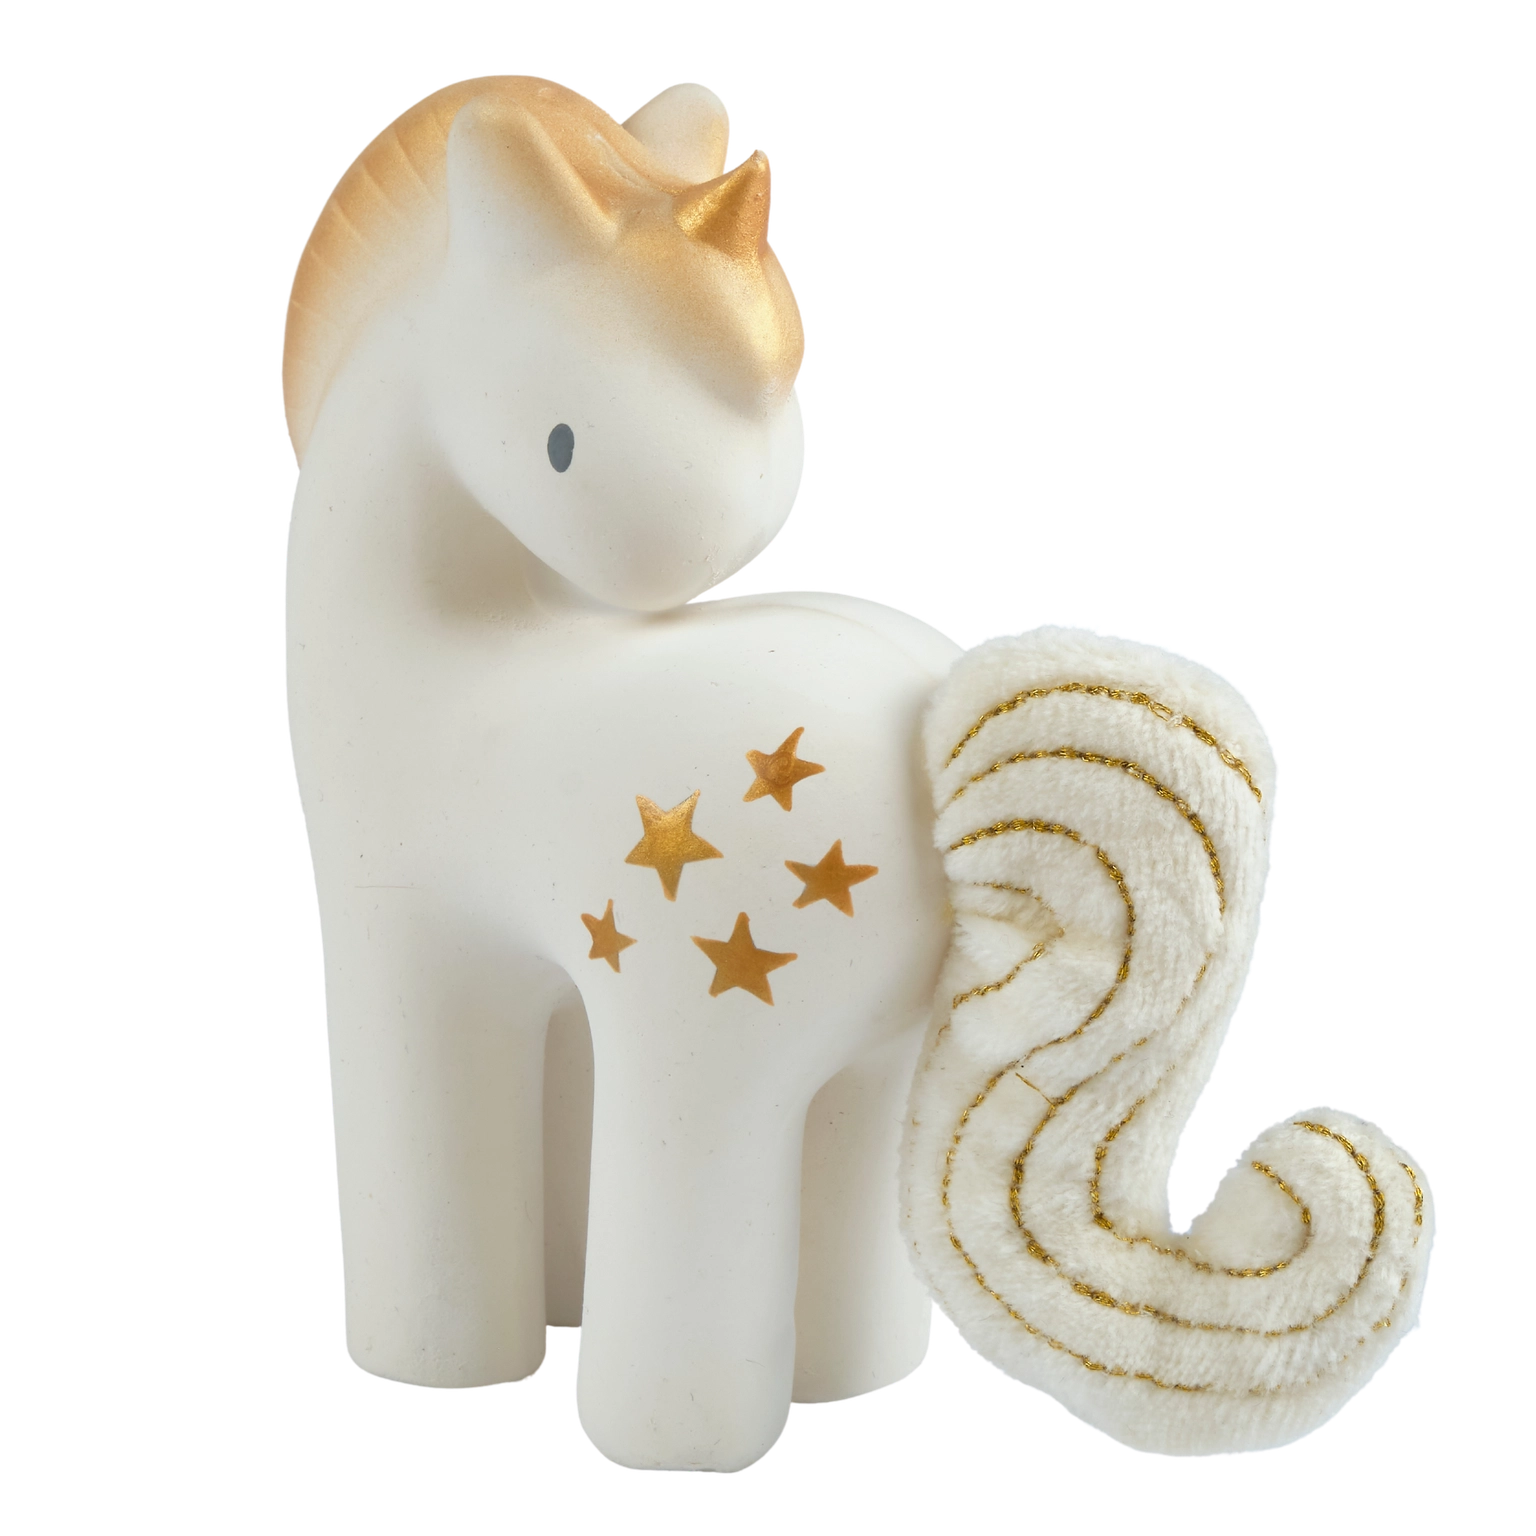 Shining Stars Unicorn Natural Rubber Rattle with Crinkle Tail